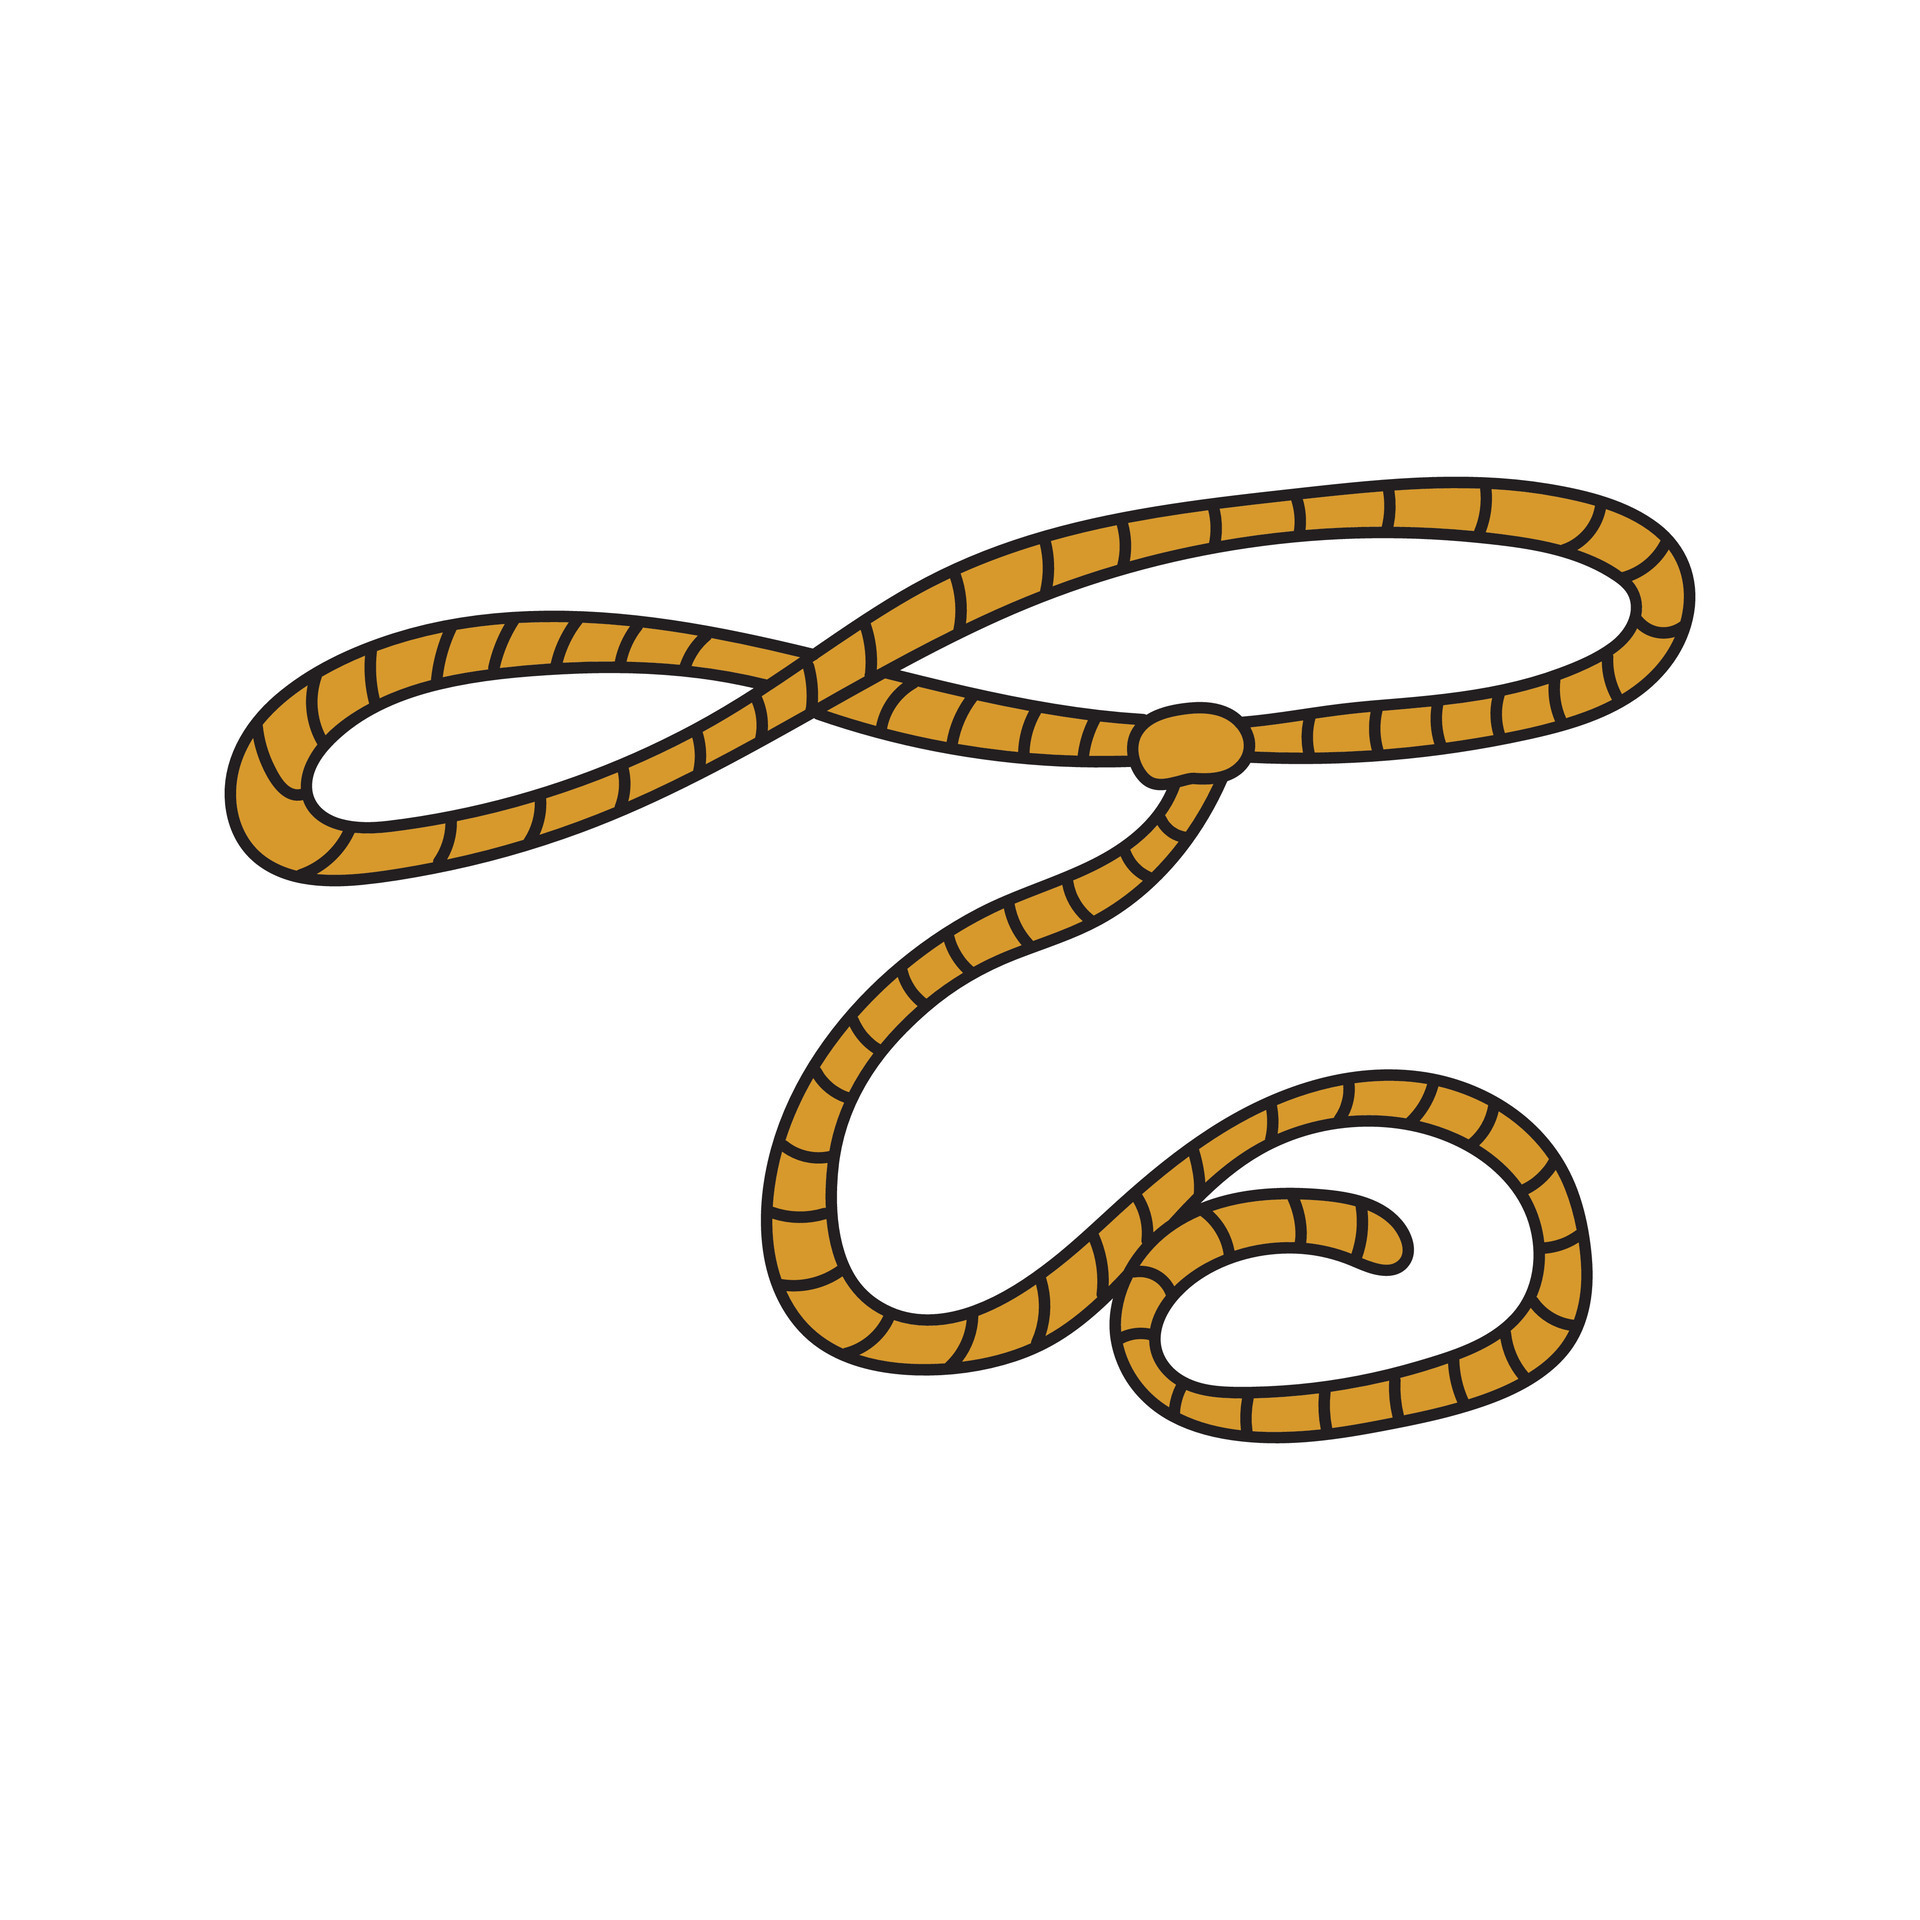 https://static.vecteezy.com/system/resources/previews/026/813/374/original/kids-drawing-cartoon-illustration-cowboy-lasso-rope-icon-isolated-on-white-background-vector.jpg